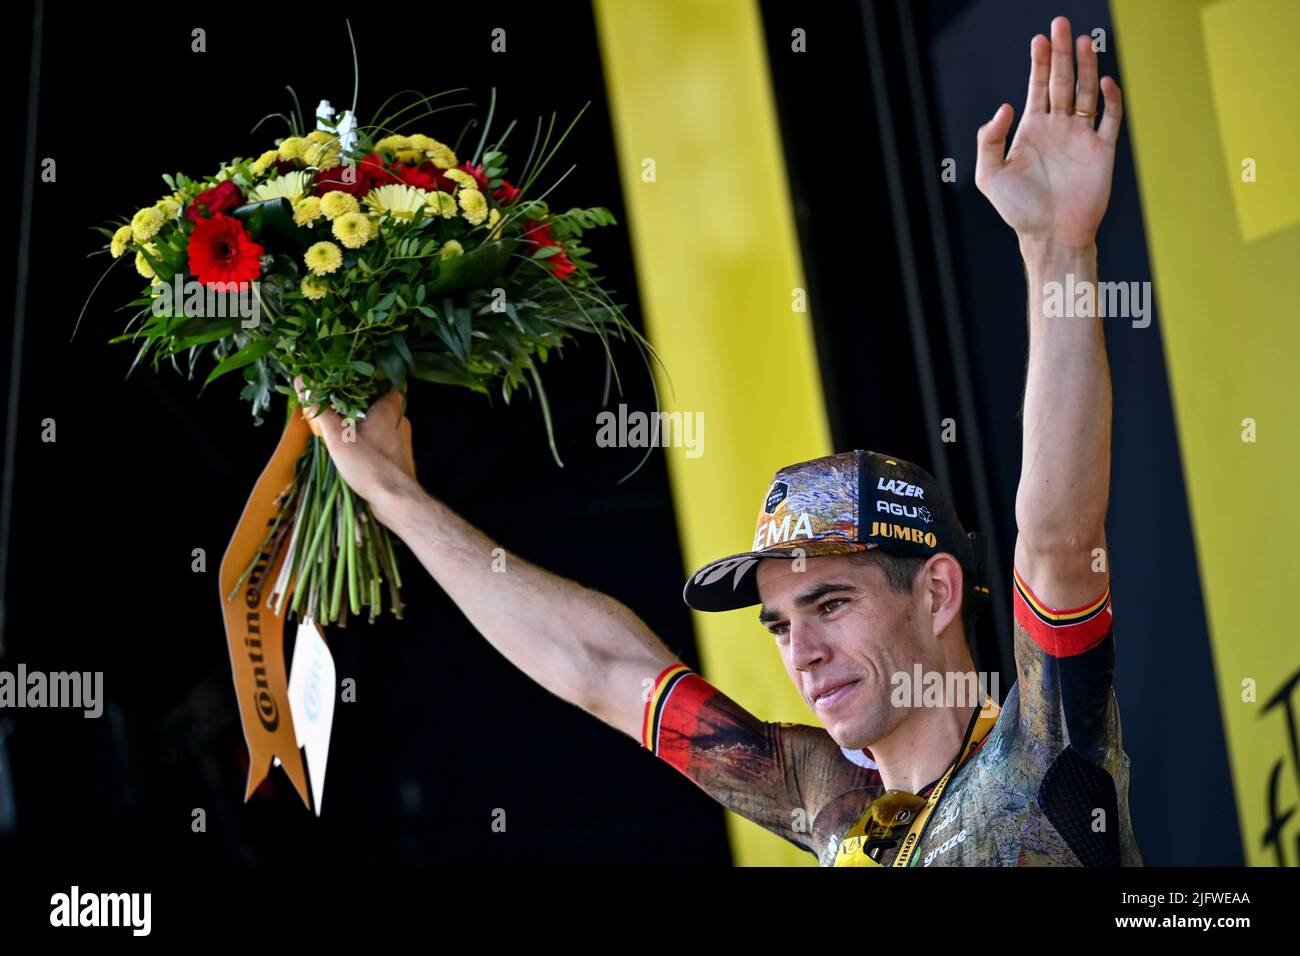 Calais, France,05 July 2022. Belgian Wout Van Aert of Team Jumbo-Visma celebrates on the podium after winning stage four of the Tour de France cycling race, a 171.5 km race from Dunkerque to Calais, France on Tuesday 05 July 2022. This year's Tour de France takes place from 01 to 24 July 2022. BELGA PHOTO JASPER JACOBS - UK OUT Stock Photo